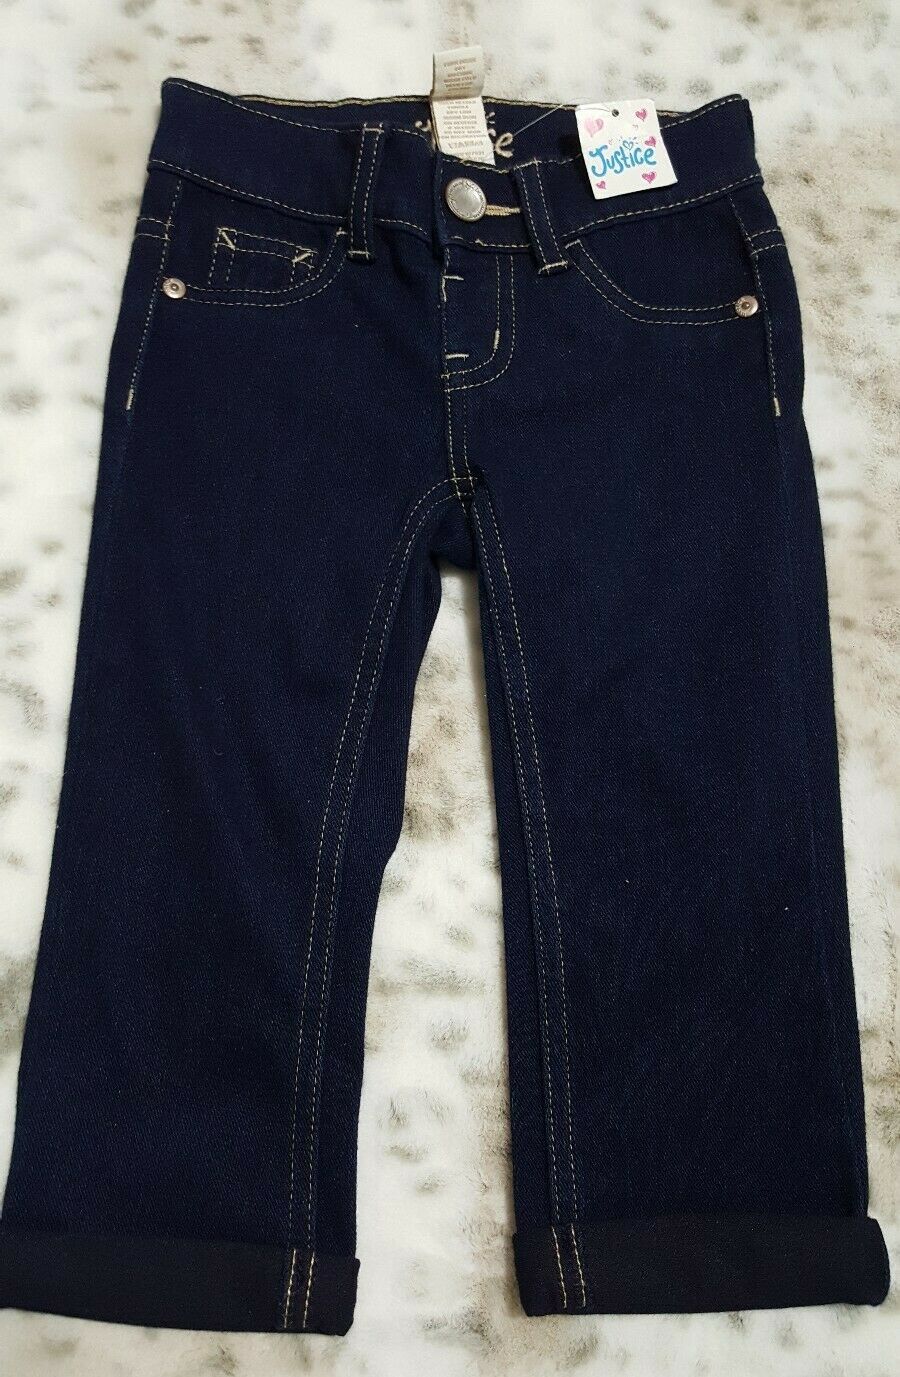 Primary image for Justice Toddler  Girls Sz 5R Very Dark Blue Cropped Leggings Denim Pants NWT